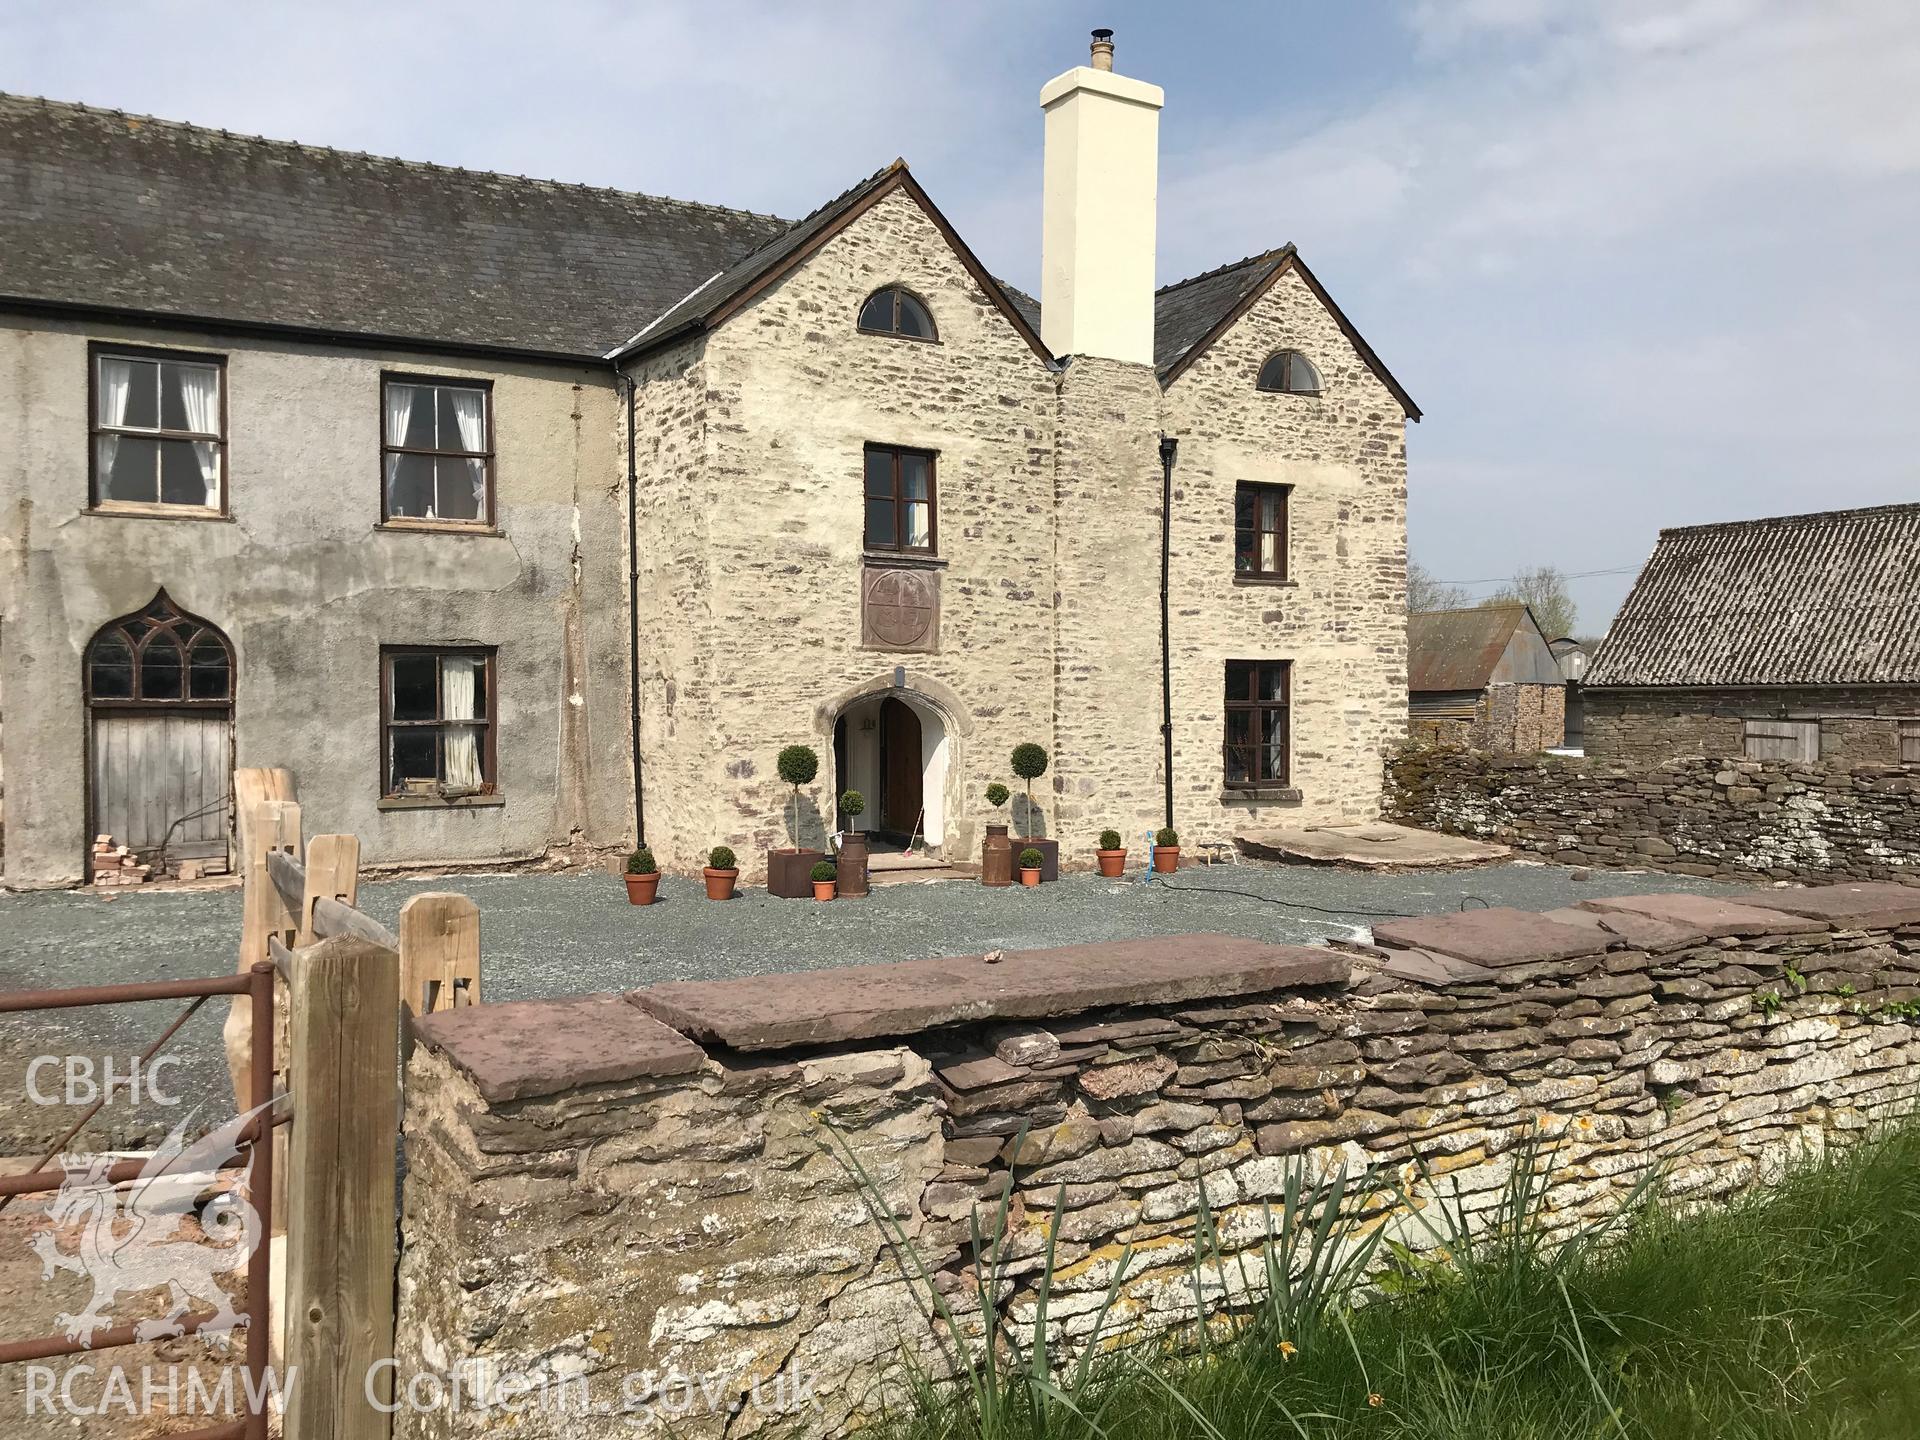 Digital colour photograph showing exterior view of the front elevation of College Farmhouse, Trefecca, Talgarth, taken by Paul R. Davis on 22nd April 2019.